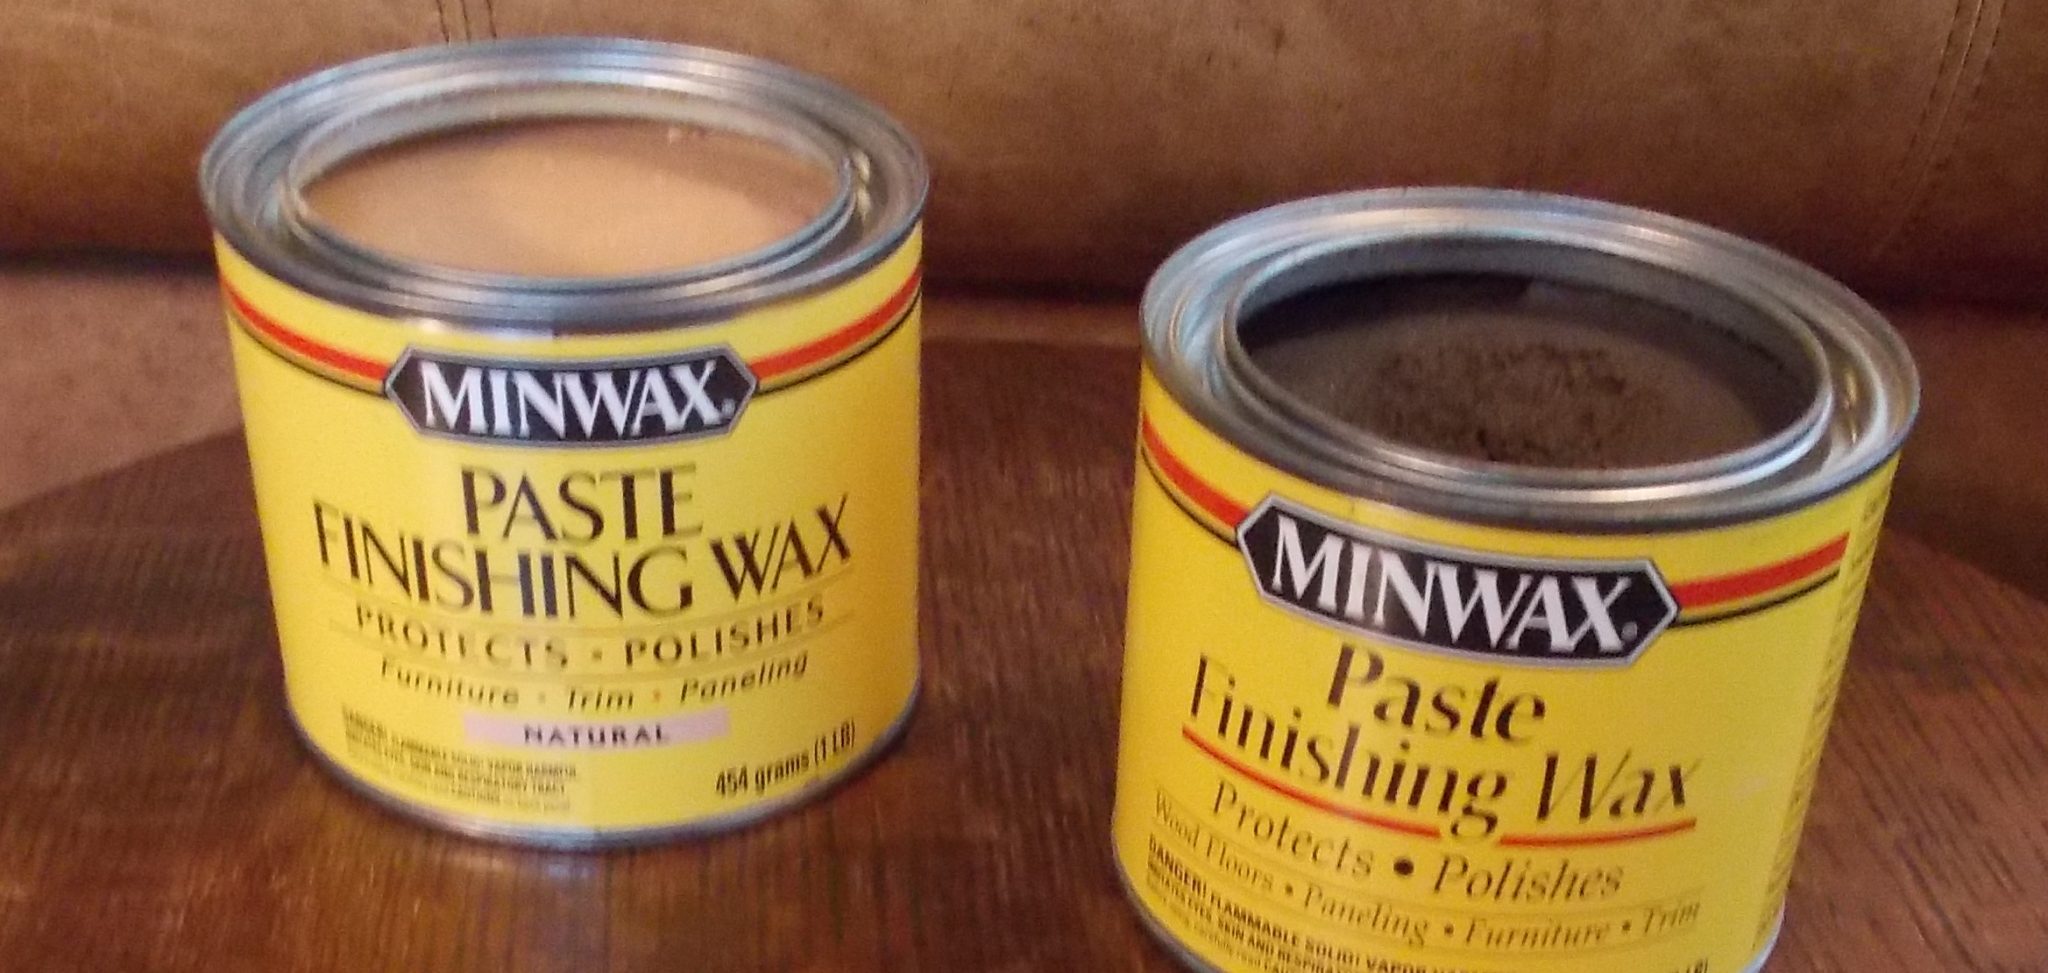 Best Wood Wax - Finding the Right Wood Wax for Your Furniture